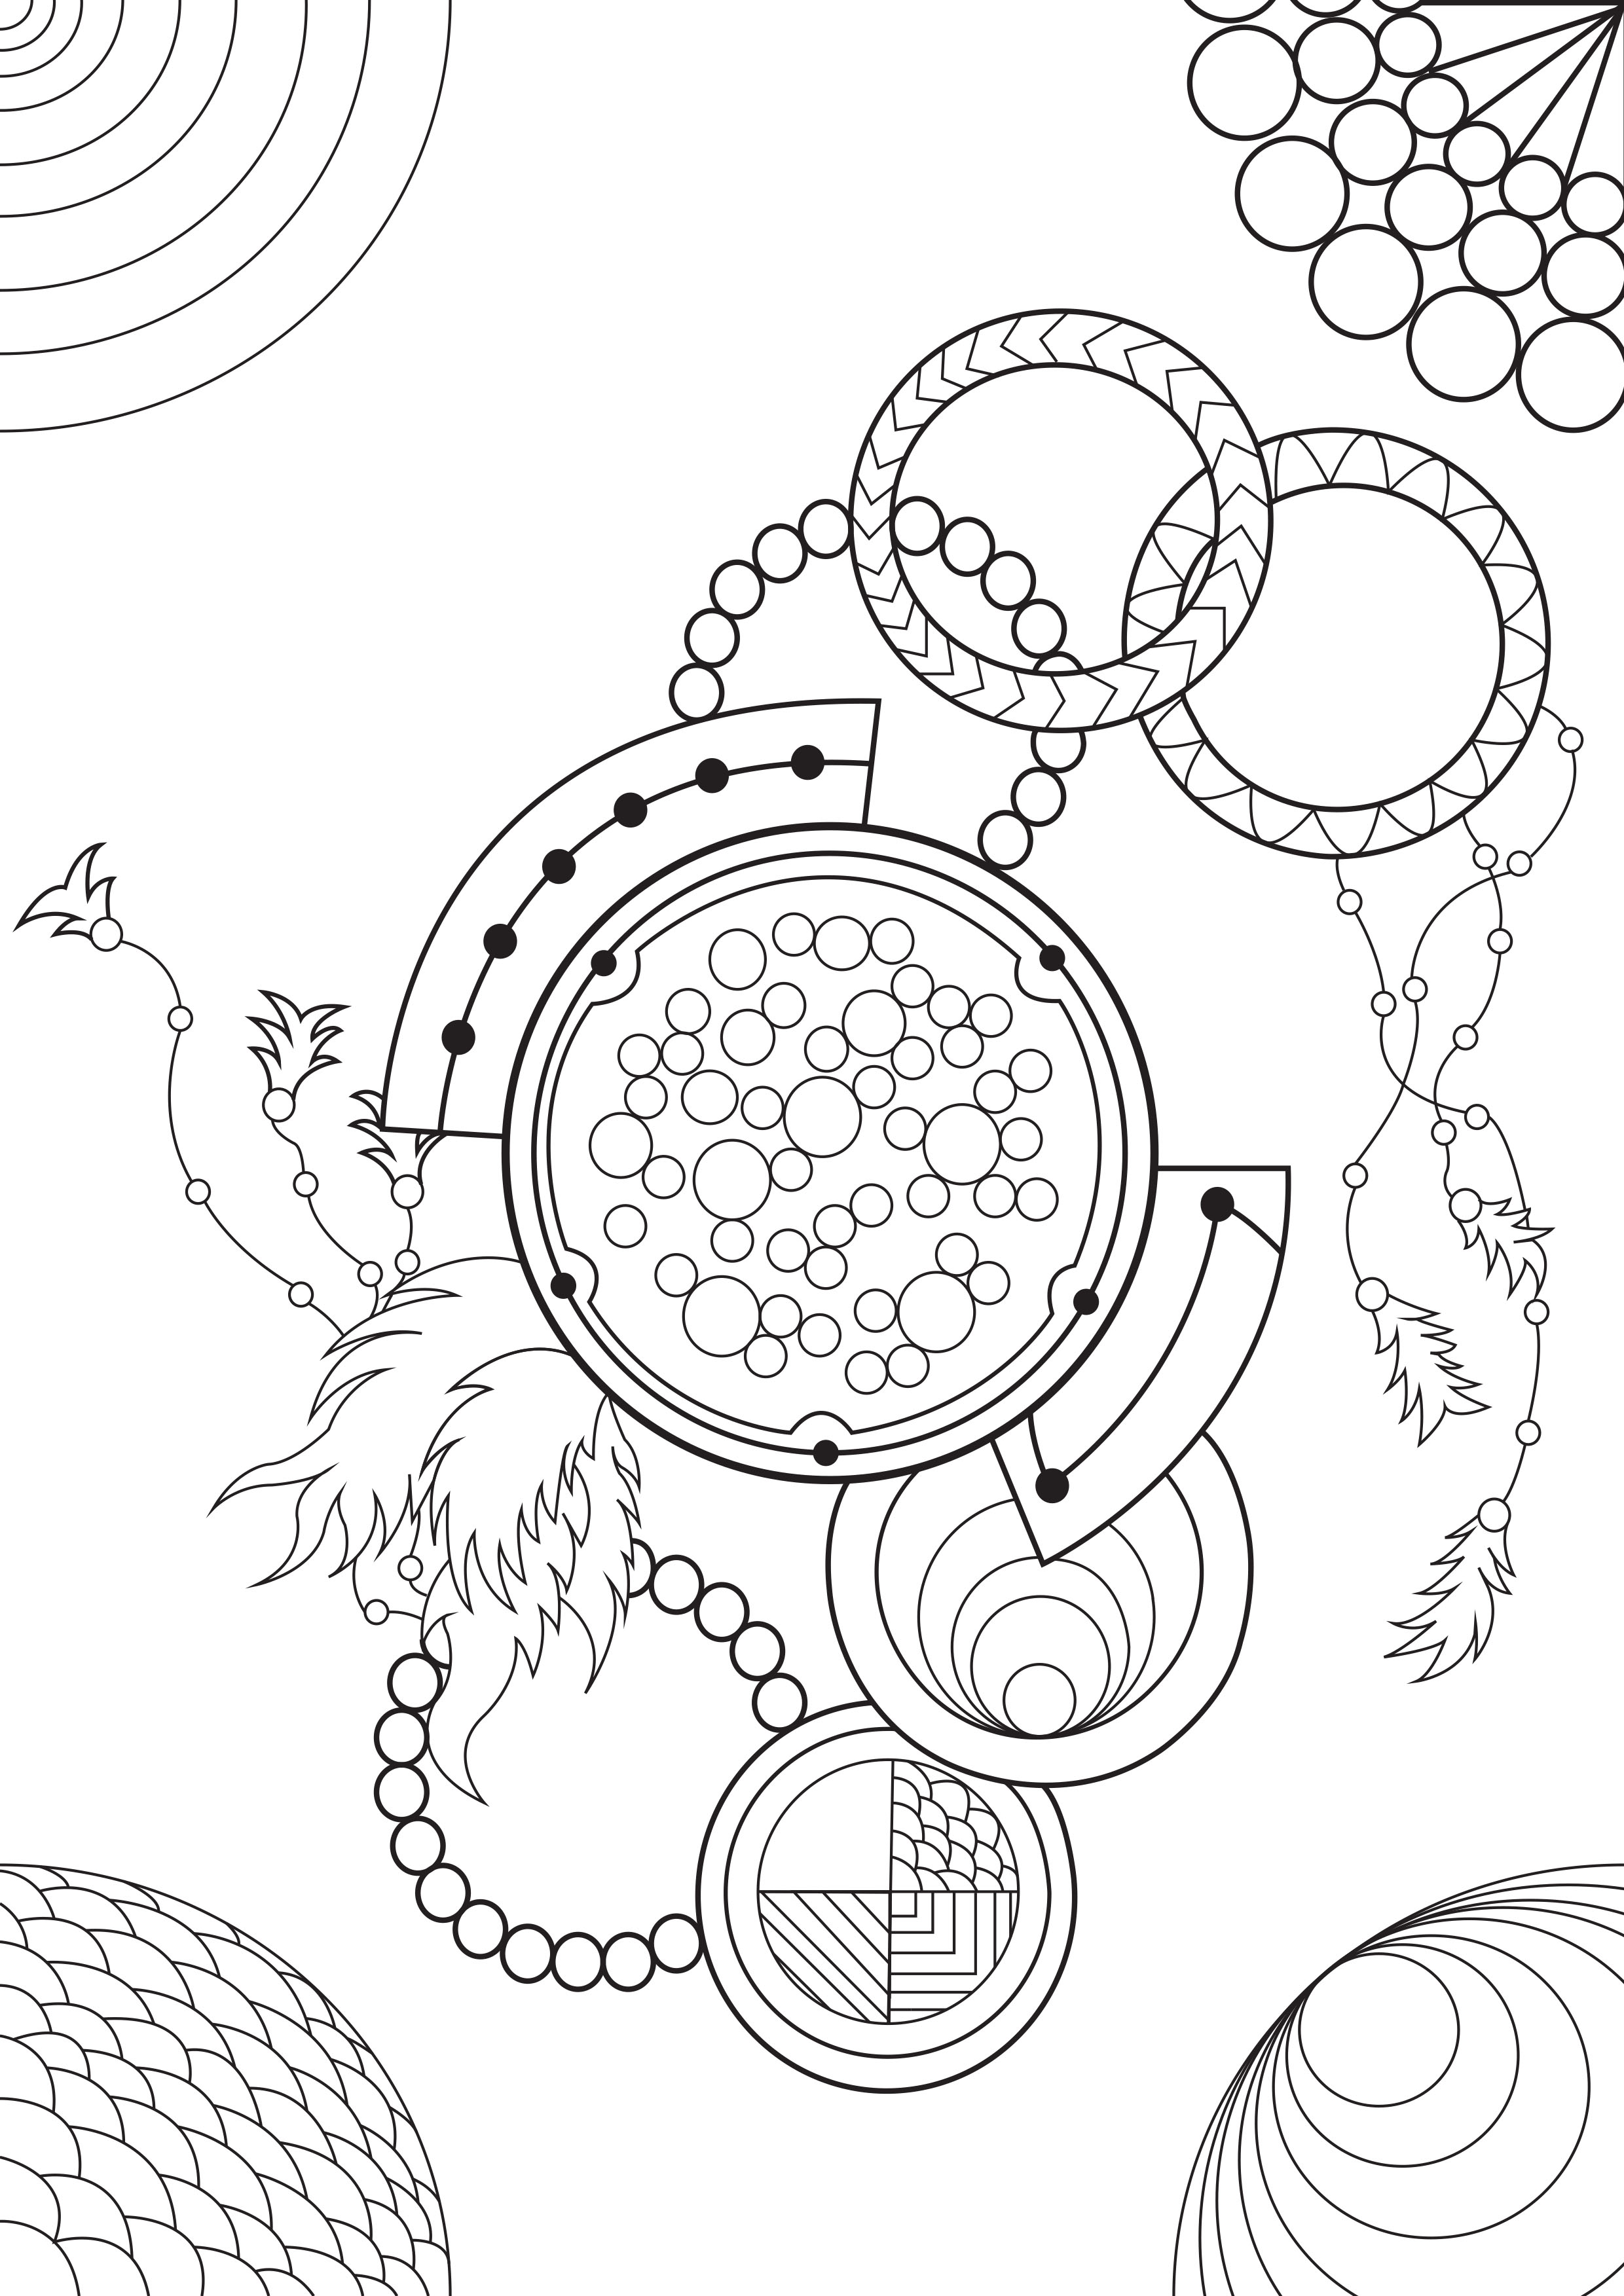 Adult coloring pages can be therapeutic, relaxing, calming, problem solving, and organizational. Here is a good example.